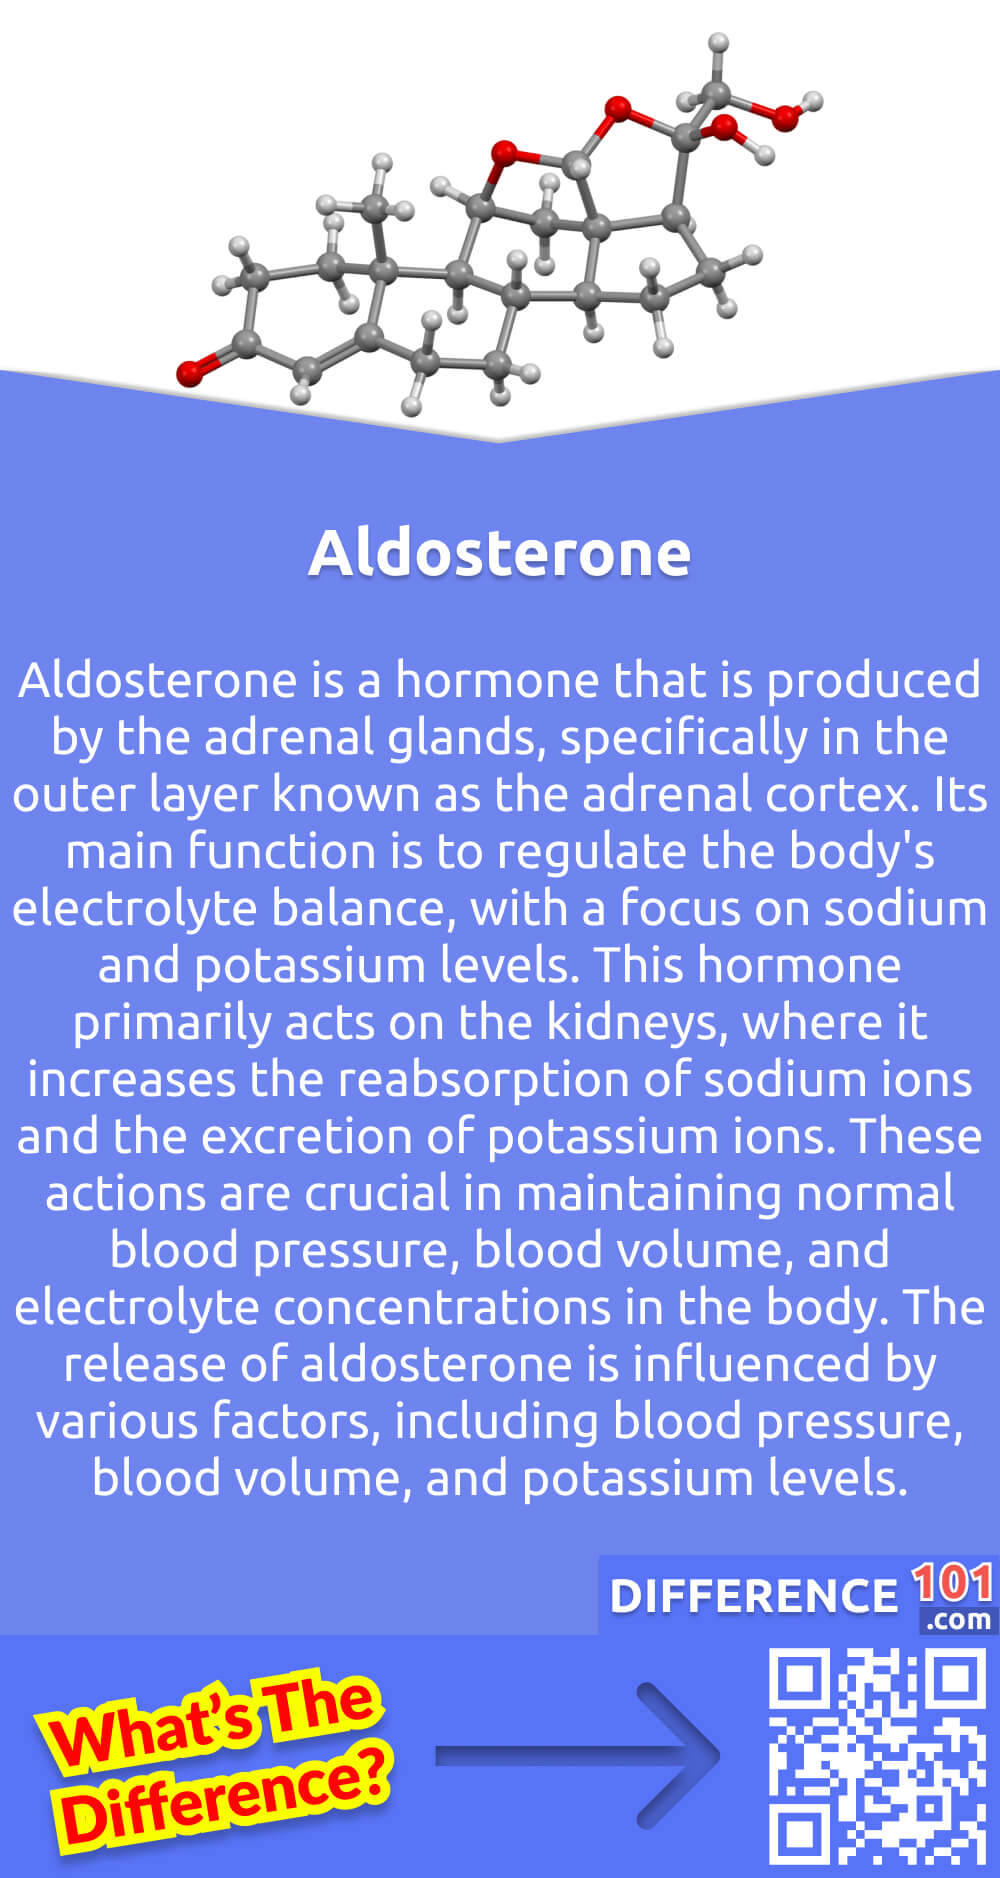 What Is Aldosterone? Aldosterone is a hormone that is produced by the adrenal glands, specifically in the outer layer known as the adrenal cortex. Its main function is to regulate the body's electrolyte balance, with a focus on sodium and potassium levels. This hormone primarily acts on the kidneys, where it increases the reabsorption of sodium ions and the excretion of potassium ions. These actions are crucial in maintaining normal blood pressure, blood volume, and electrolyte concentrations in the body. The release of aldosterone is influenced by various factors, including blood pressure, blood volume, and potassium levels. It is a vital component of the renin-angiotensin-aldosterone system, which is a complex regulatory mechanism for blood pressure and fluid balance.